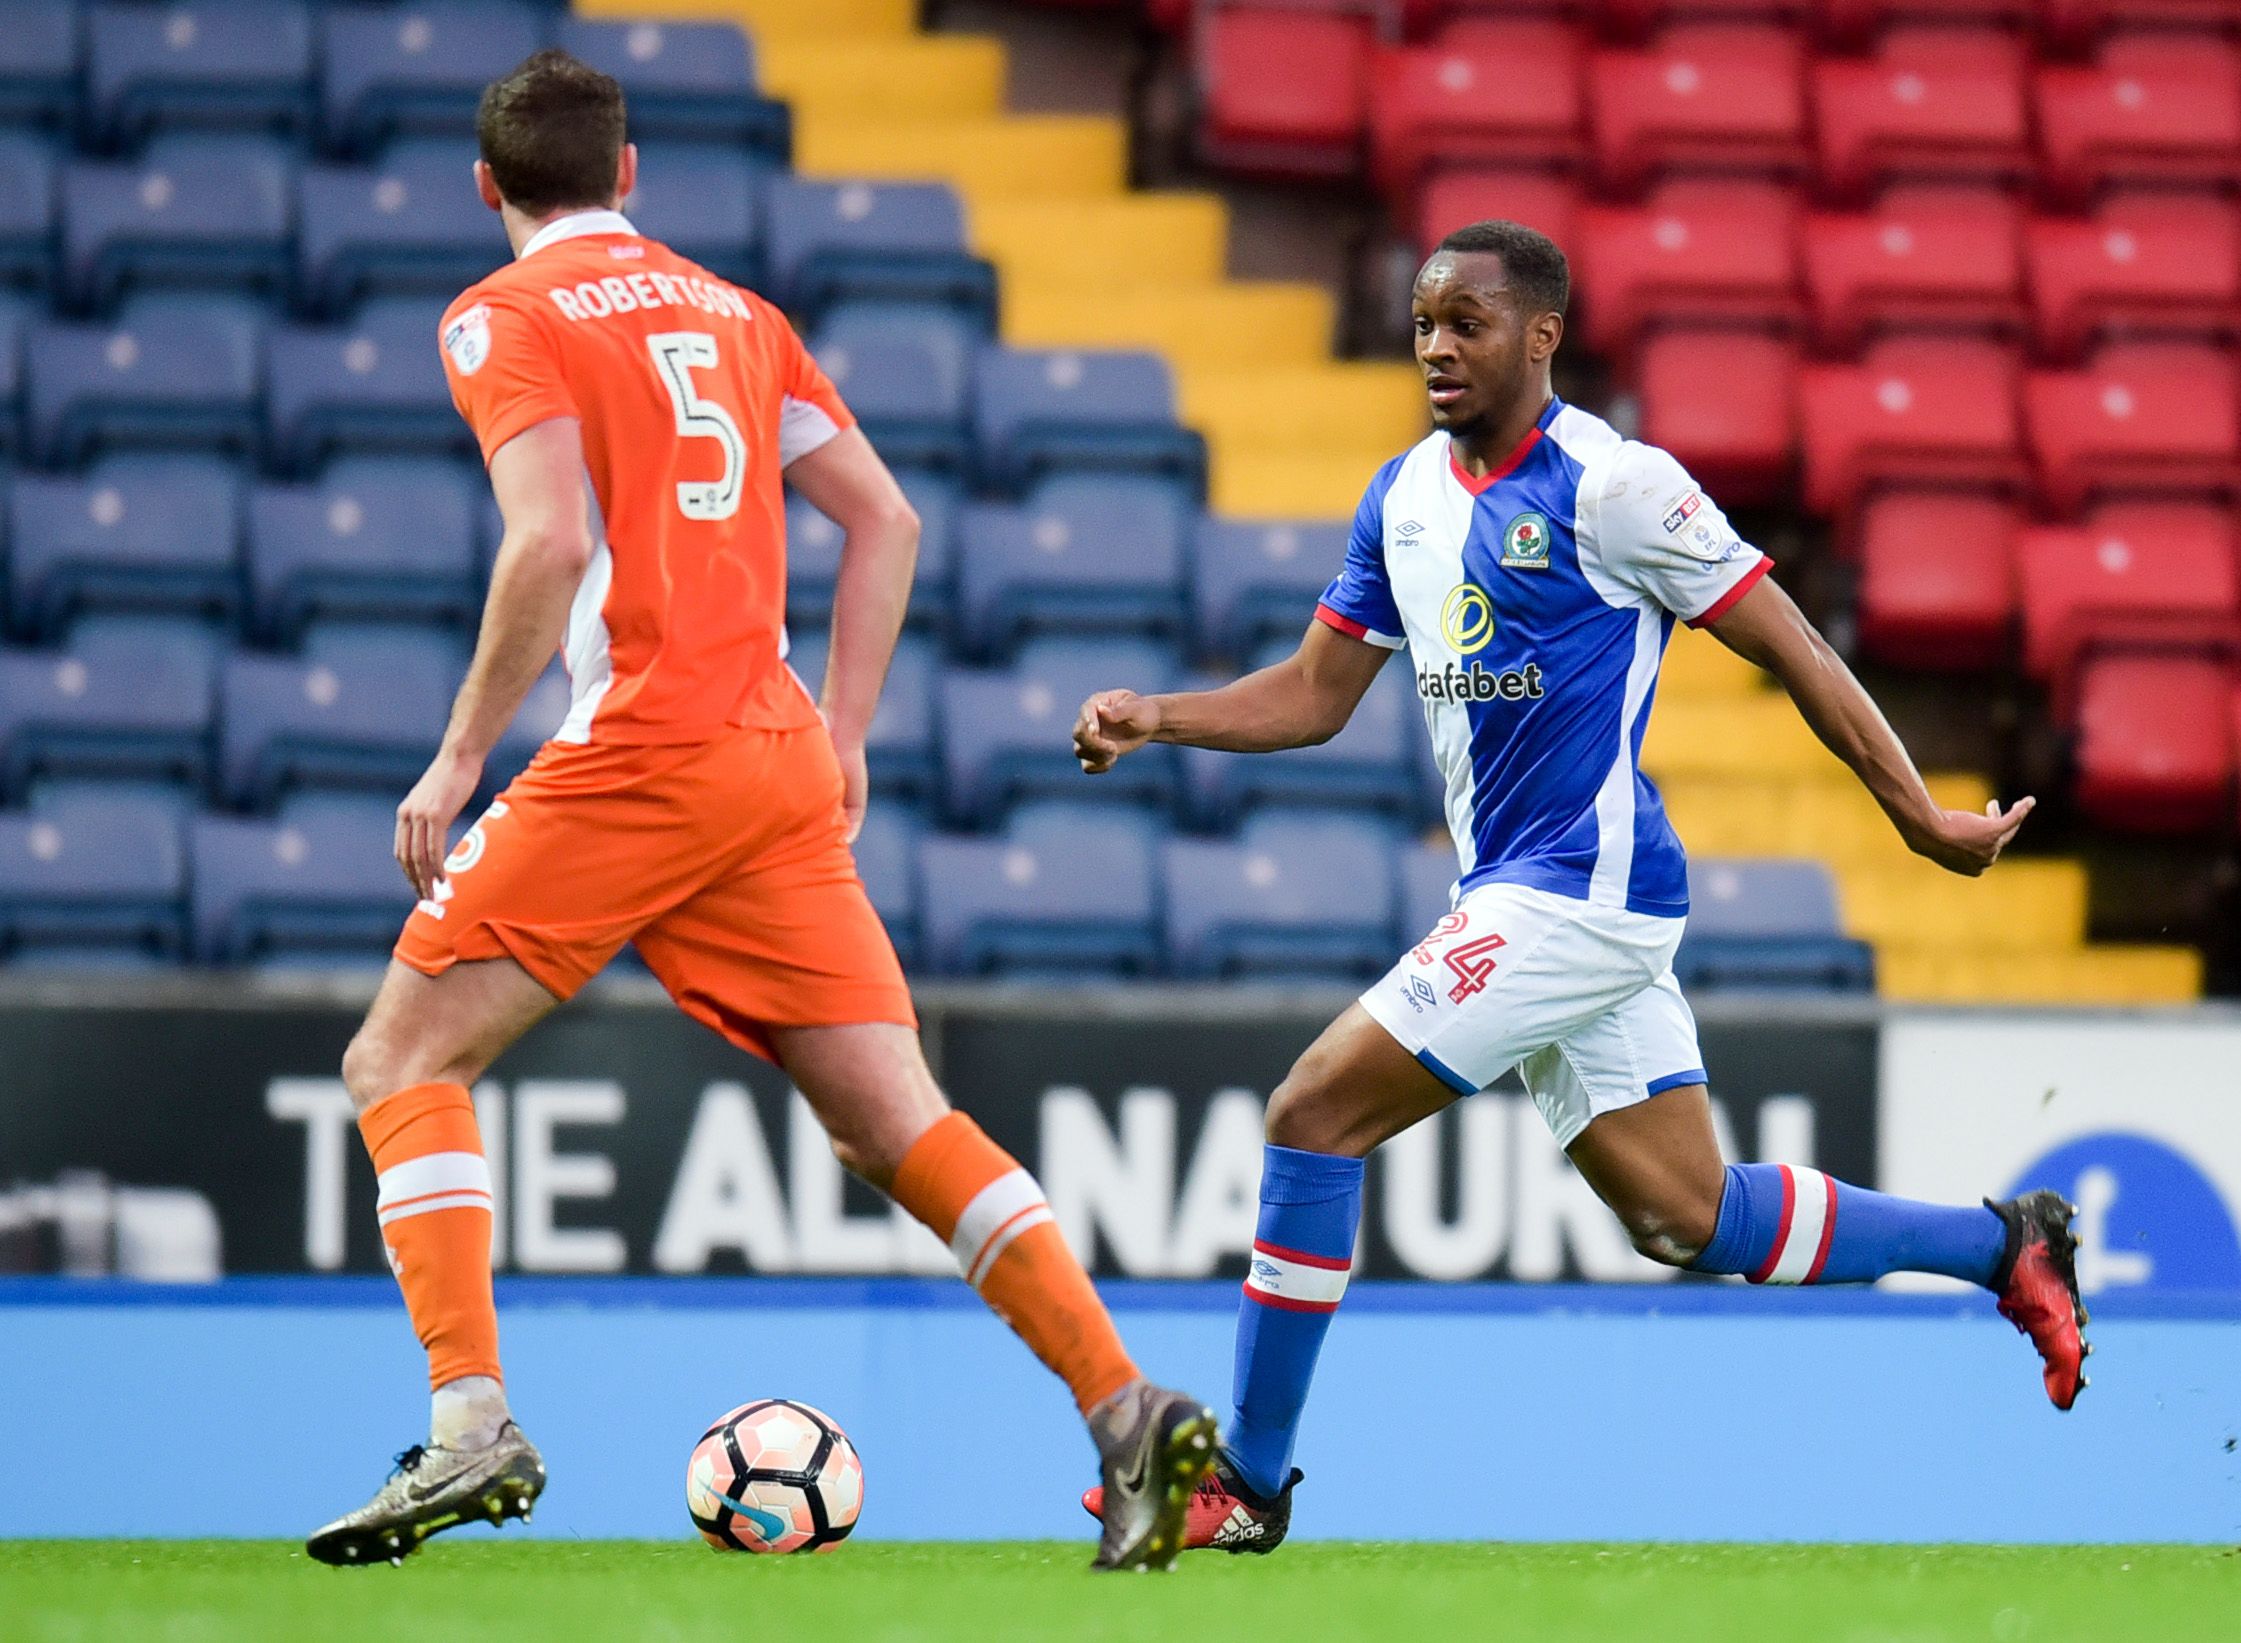 Britain Football Soccer - Blackburn Rovers v Blackpool - FA Cup Fourth Round - Ewood Park - 28/1/17 Blackburn Rovers' Ryan Nyambe in action Mandatory Credit: Action Images / Paul Burrows Livepic EDITORIAL USE ONLY. No use with unauthorized audio, video, data, fixture lists, club/league logos or 